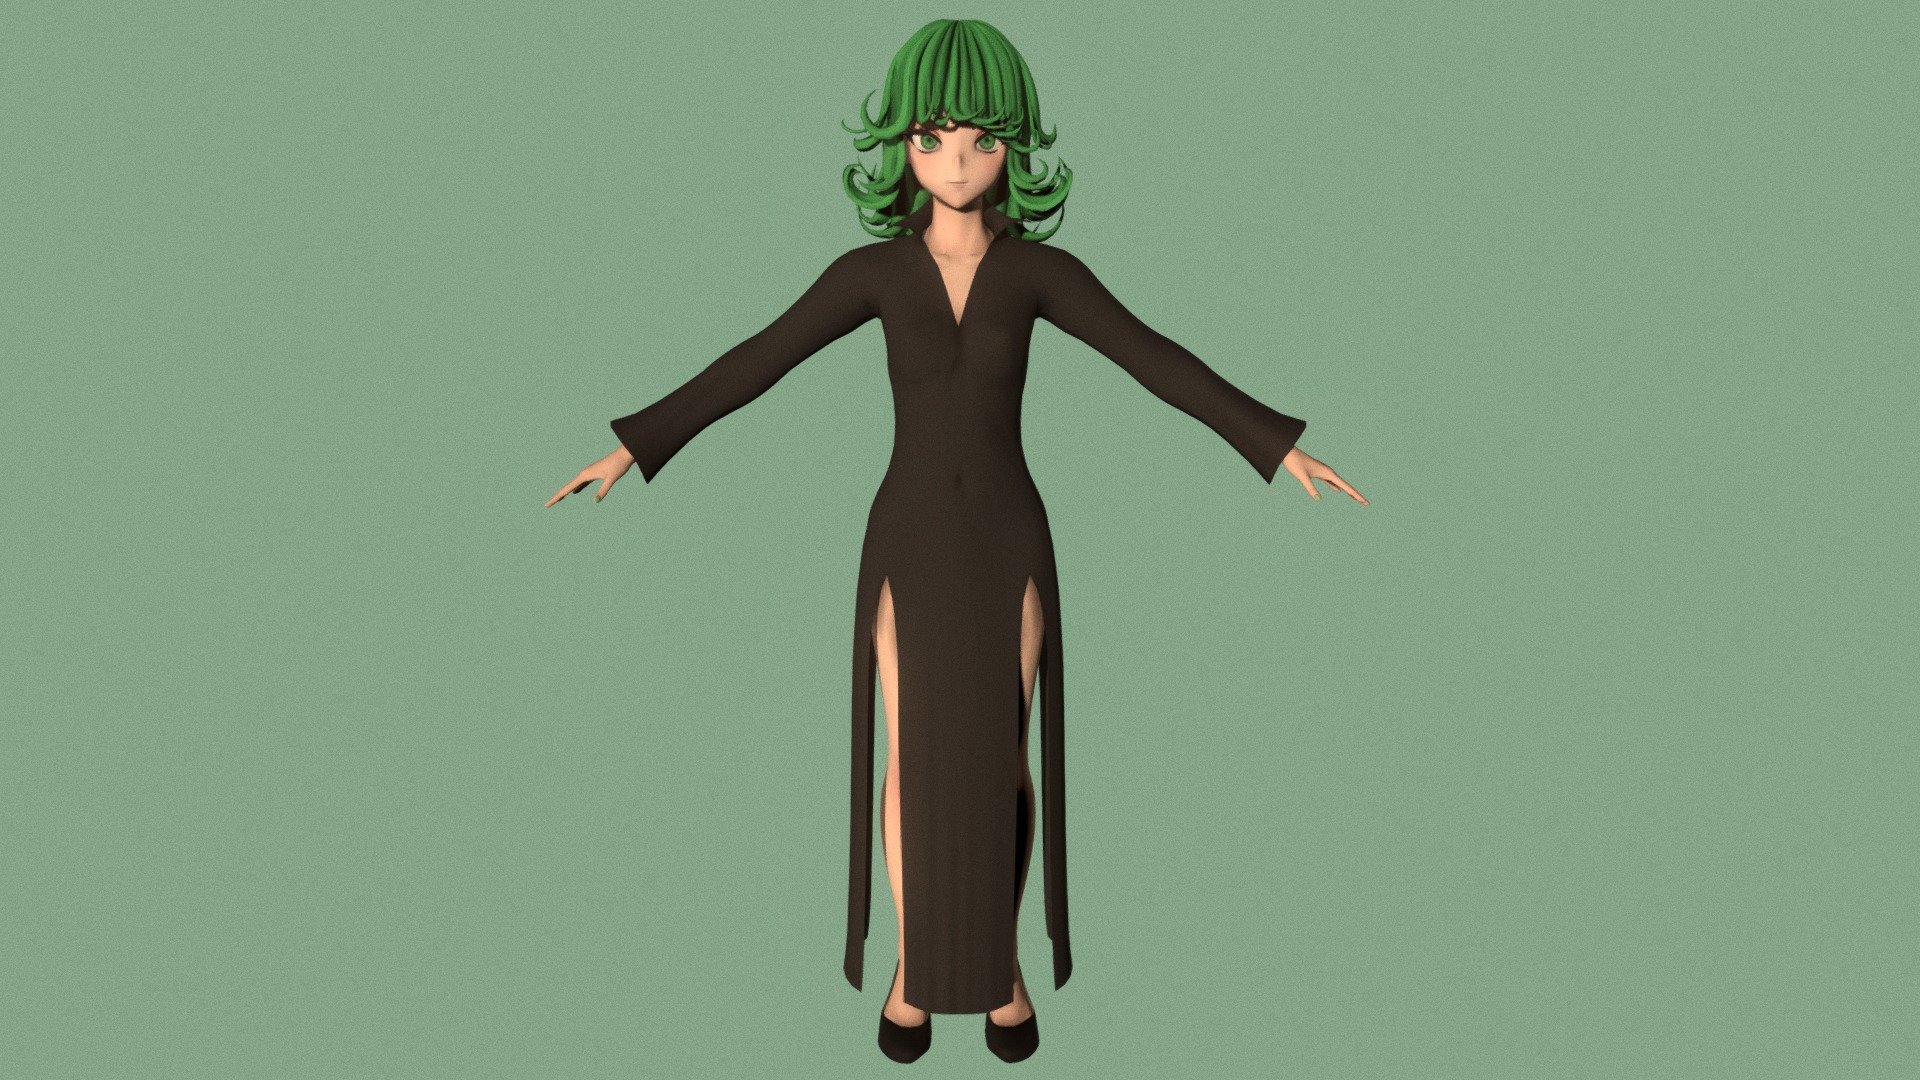 T-pose rigged model of anime girl Tatsumaki (One Punch Man).

Body and clothings are rigged and skinned by 3ds Max CAT system.

Eye direction and facial animation controlled by Morpher modifier / Shape Keys / Blendshape.

This product include .FBX (ver. 7200) and .MAX (ver. 2010) files.

3ds Max version is turbosmoothed to give a high quality render (as you can see here).

Original main body mesh have ~7.000 polys.

This 3D model may need some tweaking to adapt the rig system to games engine and other platforms.

I support convert model to various file formats (the rig data will be lost in this process): 3DS; AI; ASE; DAE; DWF; DWG; DXF; FLT; HTR; IGS; M3G; MQO; OBJ; SAT; STL; W3D; WRL; X.

You can buy all of my models in one pack to save cost: https://sketchfab.com/3d-models/all-of-my-anime-girls-c5a56156994e4193b9e8fa21a3b8360b

And I can make commission models.

If you have any questions, please leave a comment or contact me via my email 3d.eden.project@gmail.com 3d model